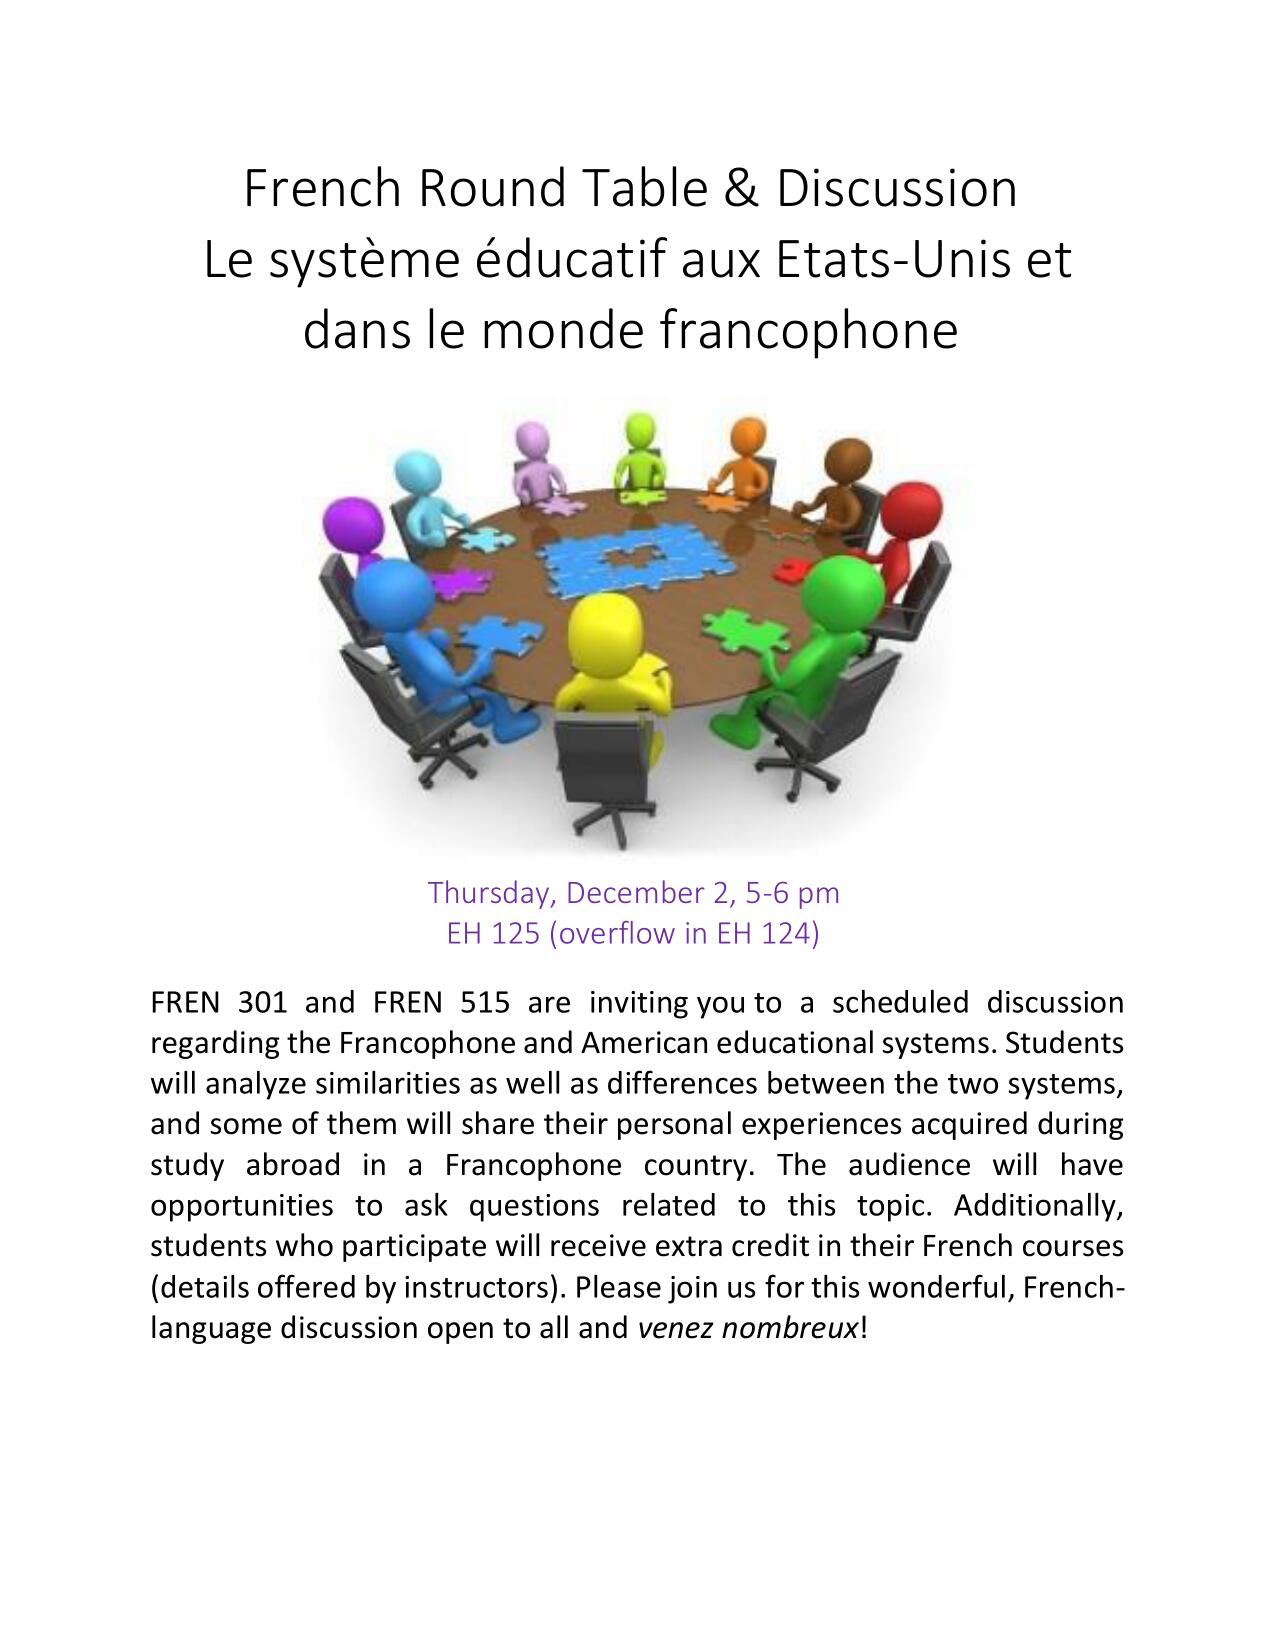 French Round Table & Discussion Le système éducatif aux Etats-Unis et dans le monde francophone. Friday, December 2, 5-6 pm EH 125 (overflow in EH 124) FREN 301 and FREN 515 are inviting you to a scheduled discussion regarding the Francophone and American educational systems. Students will analyze similarities as well as differences between the two systems, and some of them will share their personal experiences acquired during study abroad in a Francophone country. The audience will have opportunities to ask questions related to this topic. Additionally, students who participate will receive extra credit in their French courses (details offered by instructors). Please join us for this wonderful, Frenchlanguage discussion open to all and venez nombreux!